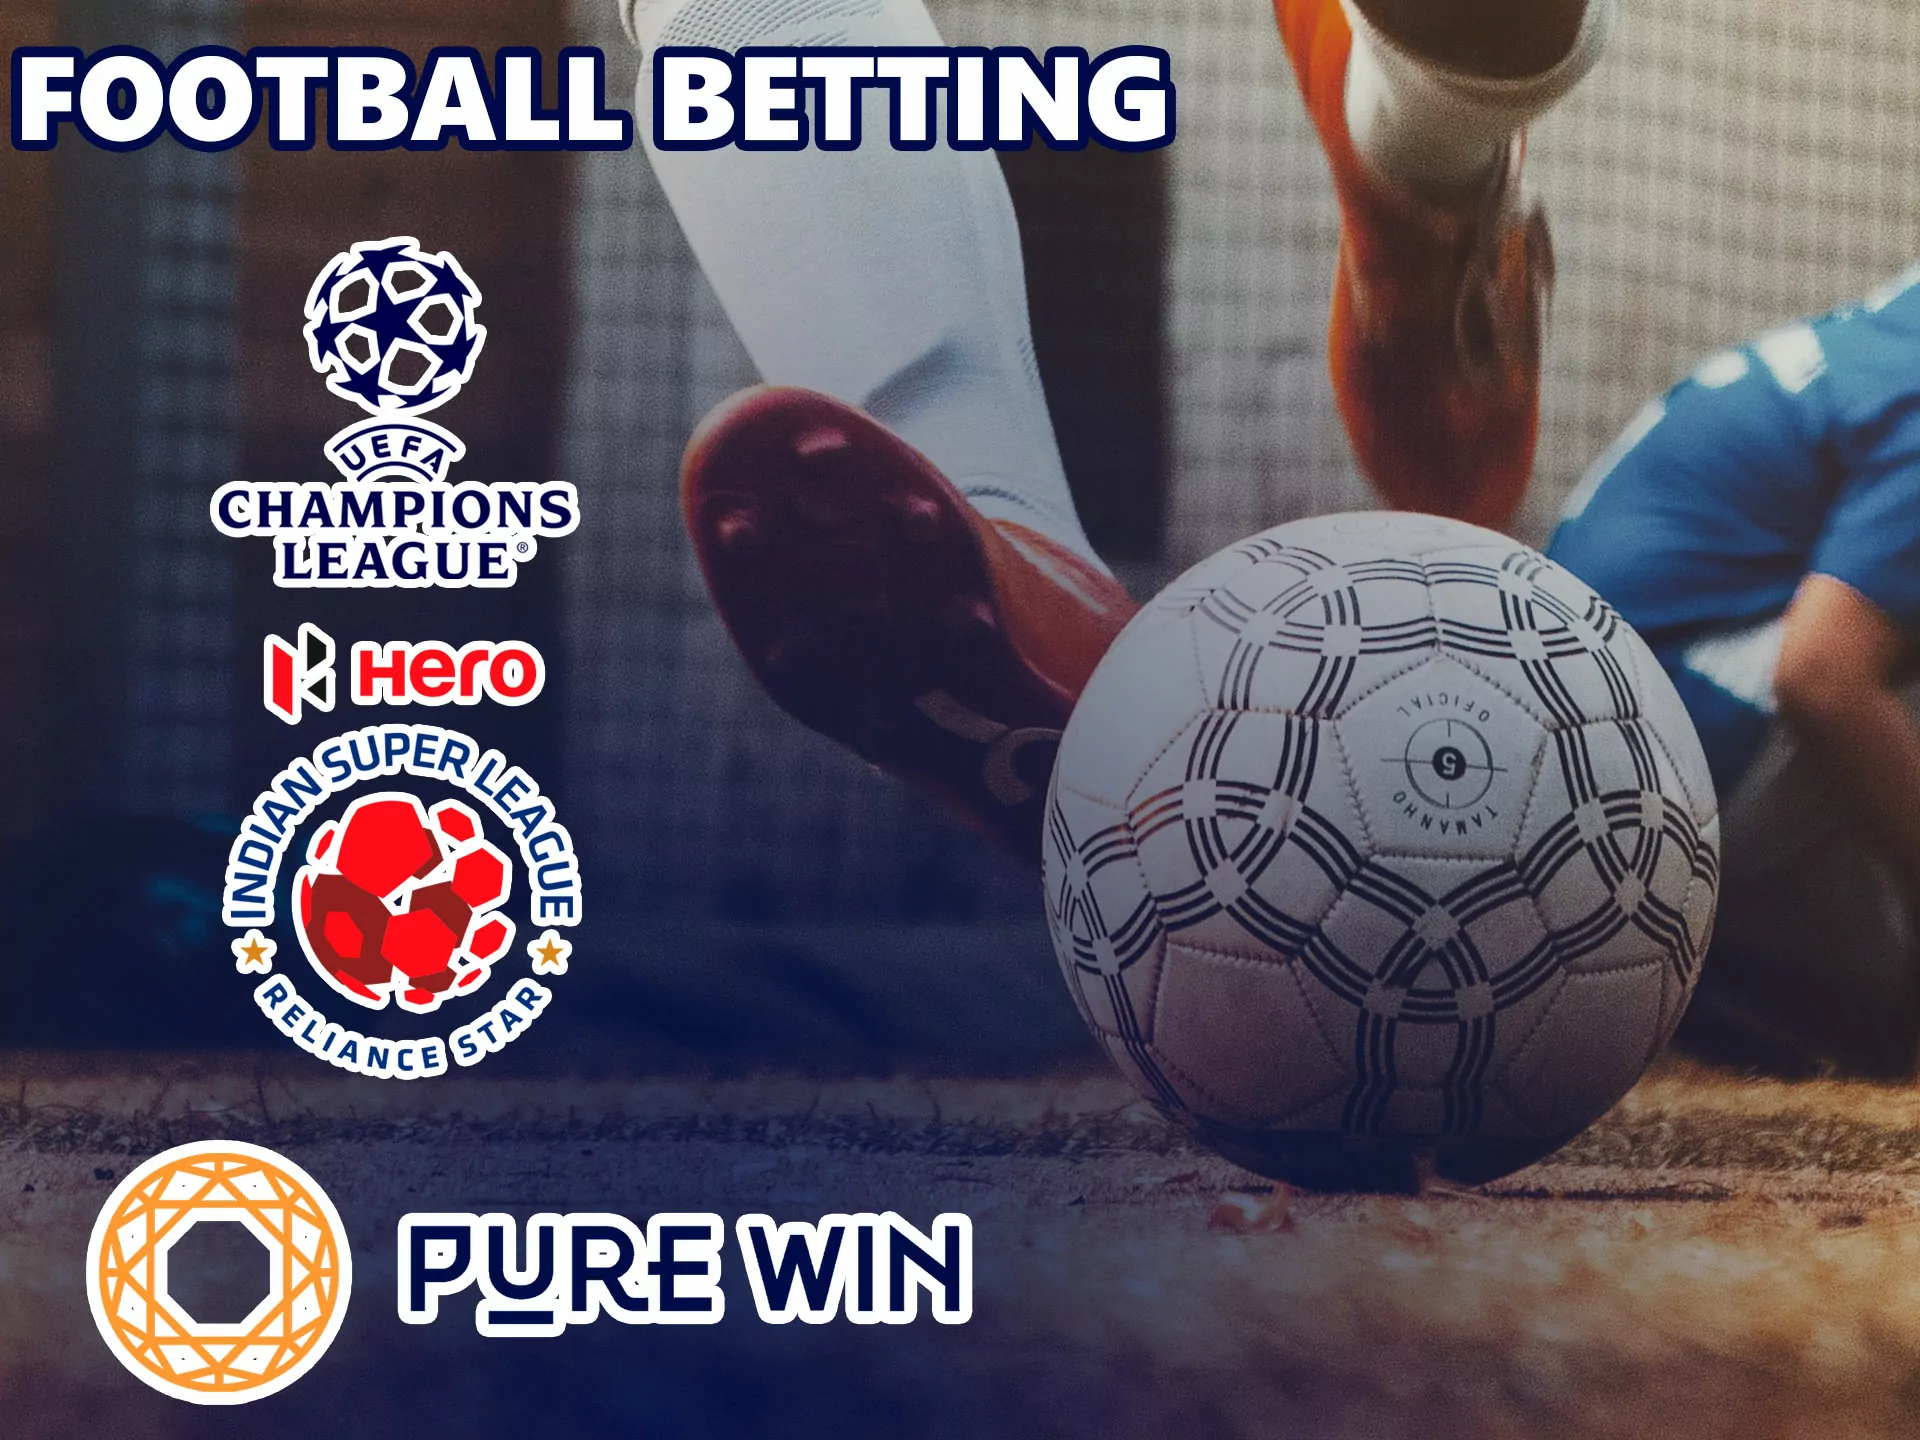 Football betting section is also available at Pure WIn bookmaker.